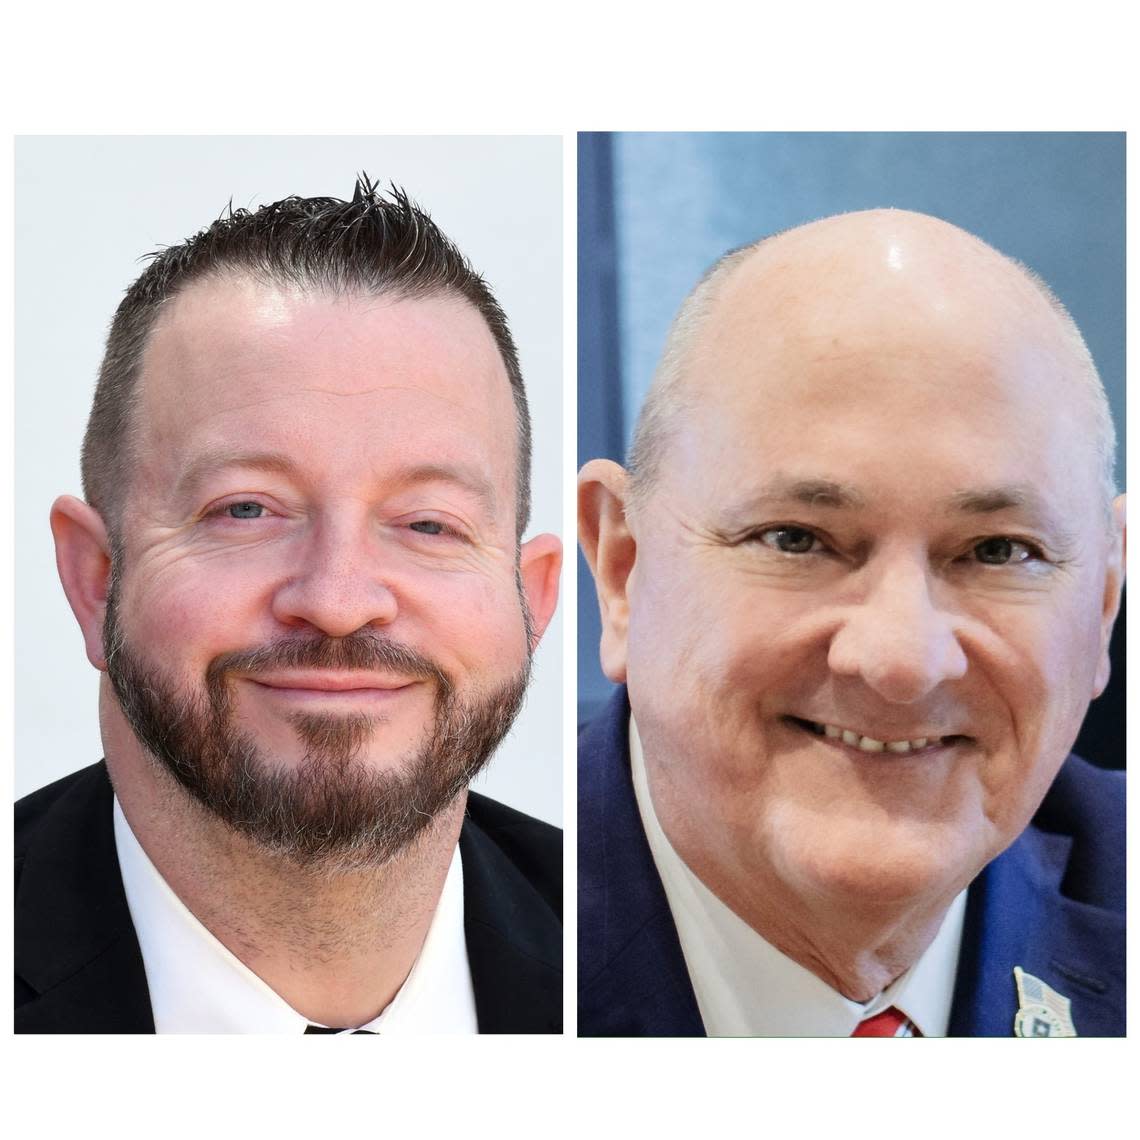 Commissioner Ryan Davidson, left, and Clyde Dornier are vying for an Ada County Commissioner seat in the Republican primary on May 21.